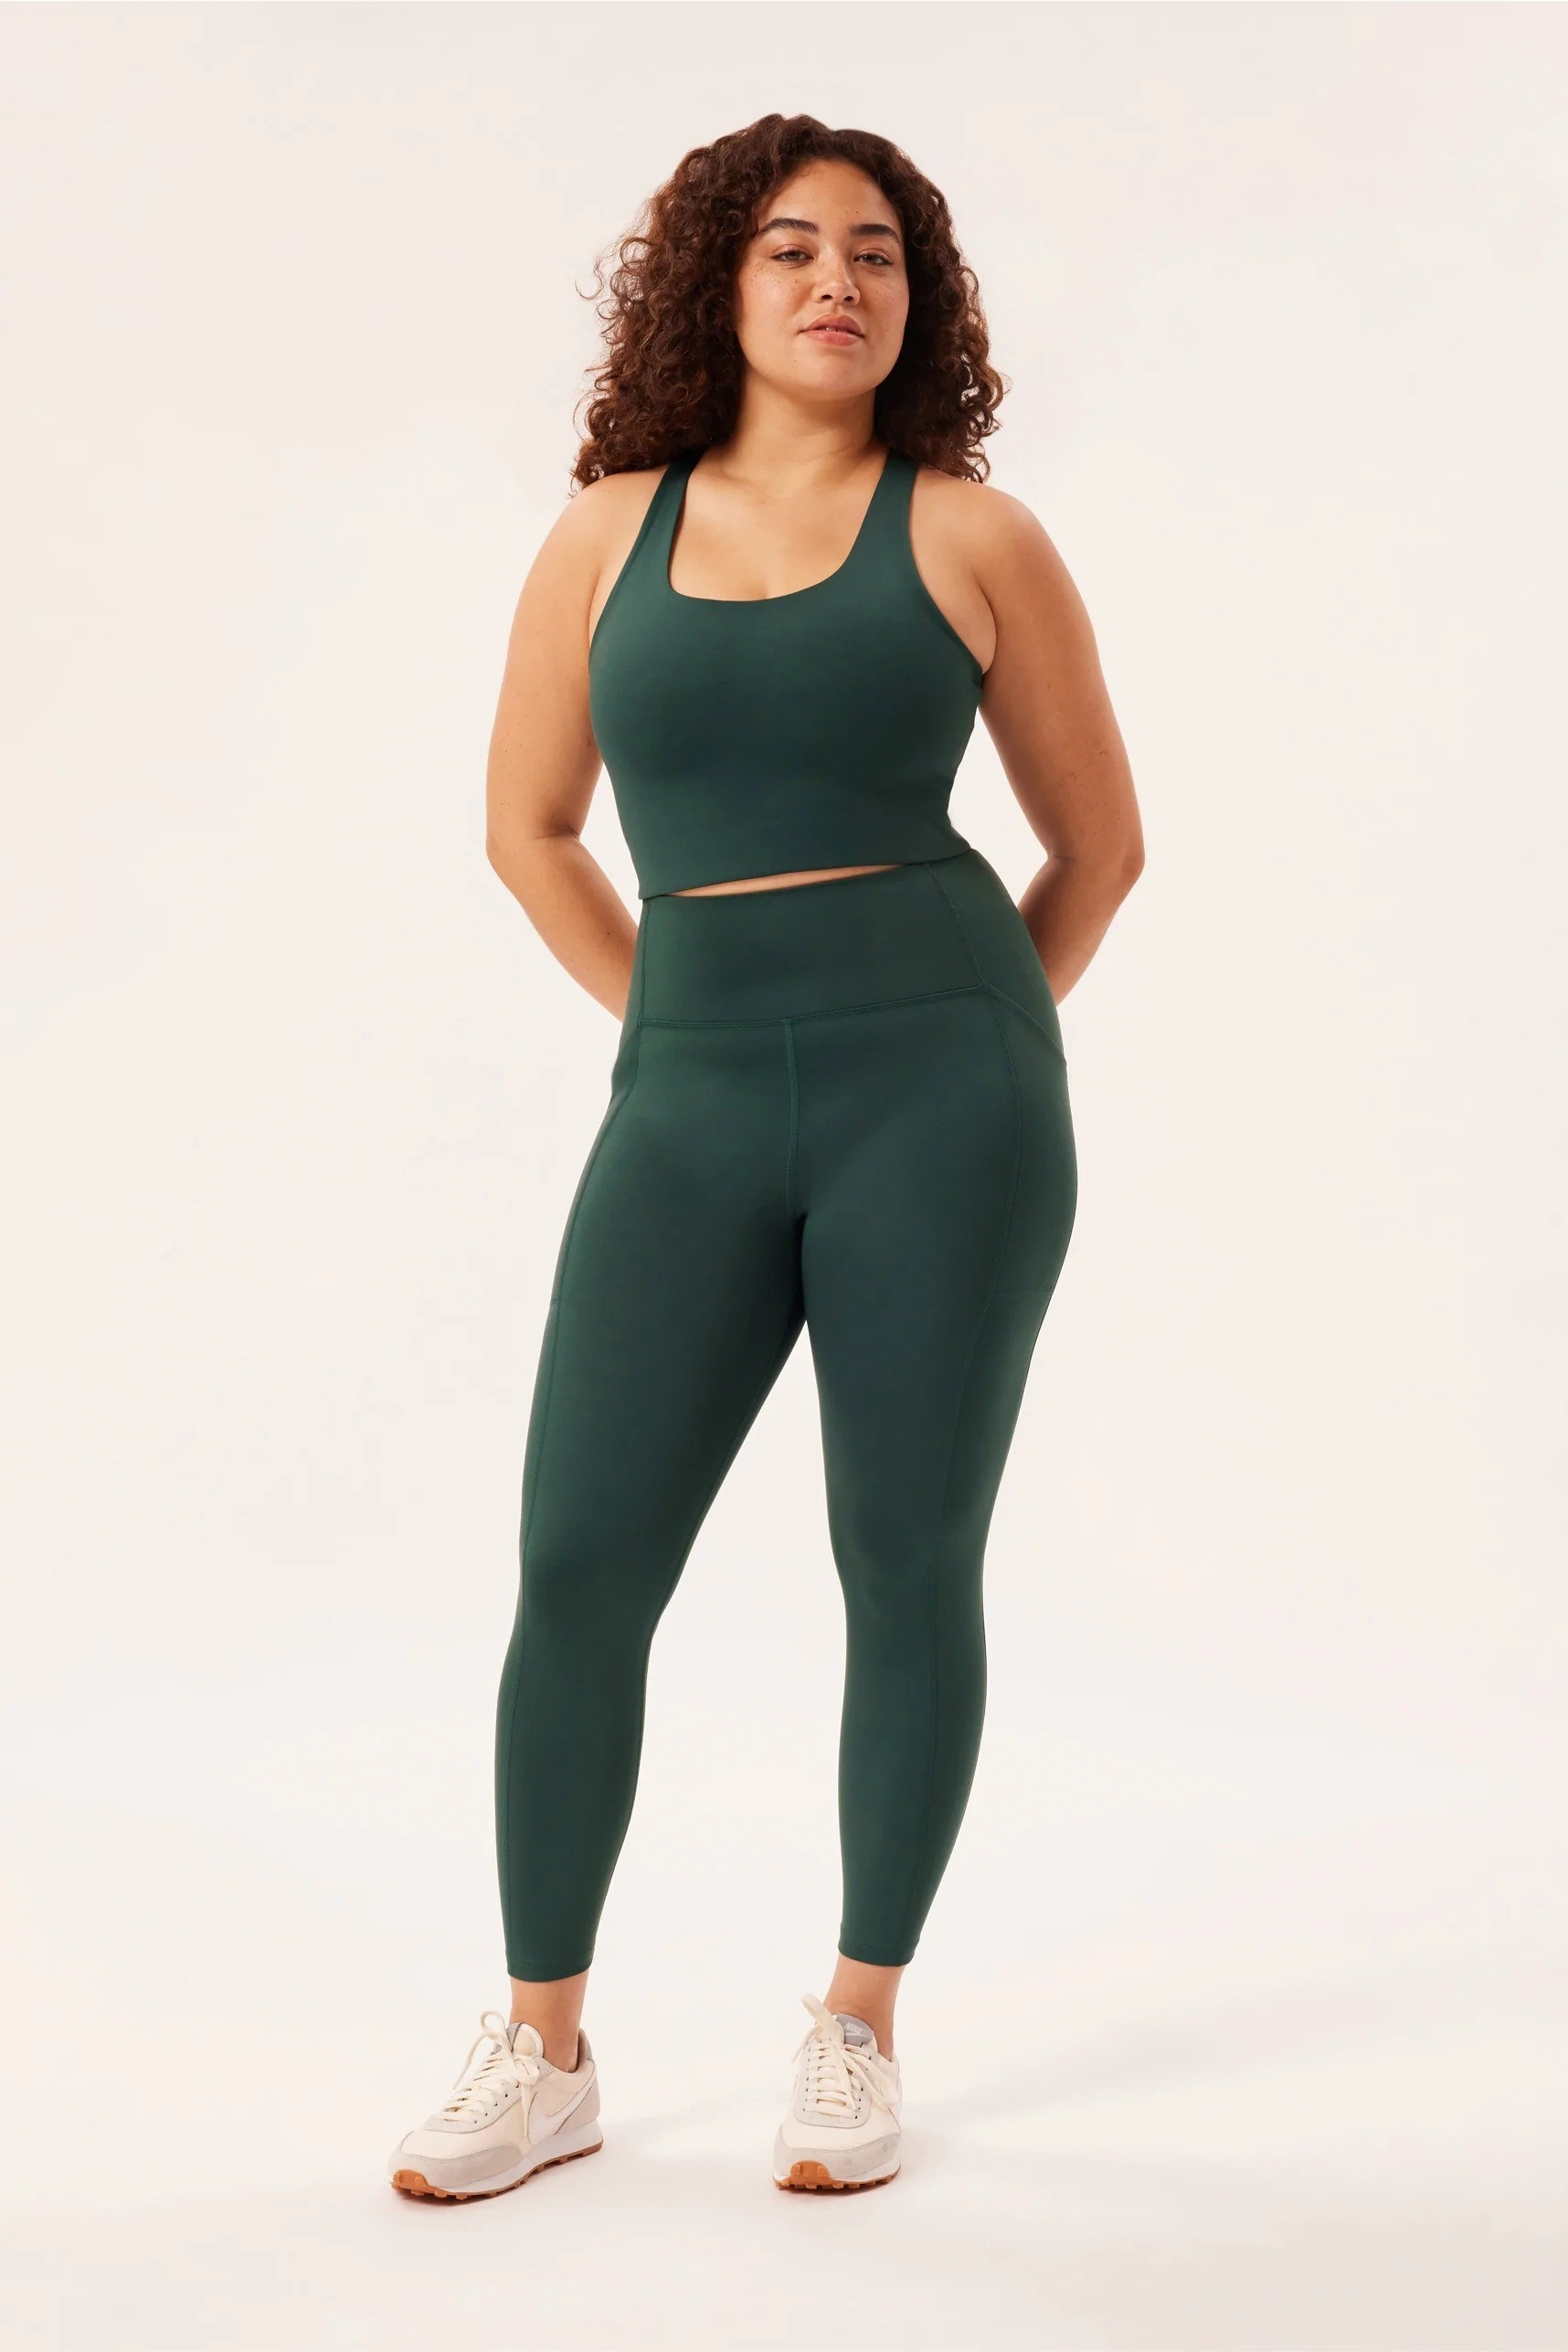 Model in green leggings and a matching sports bra